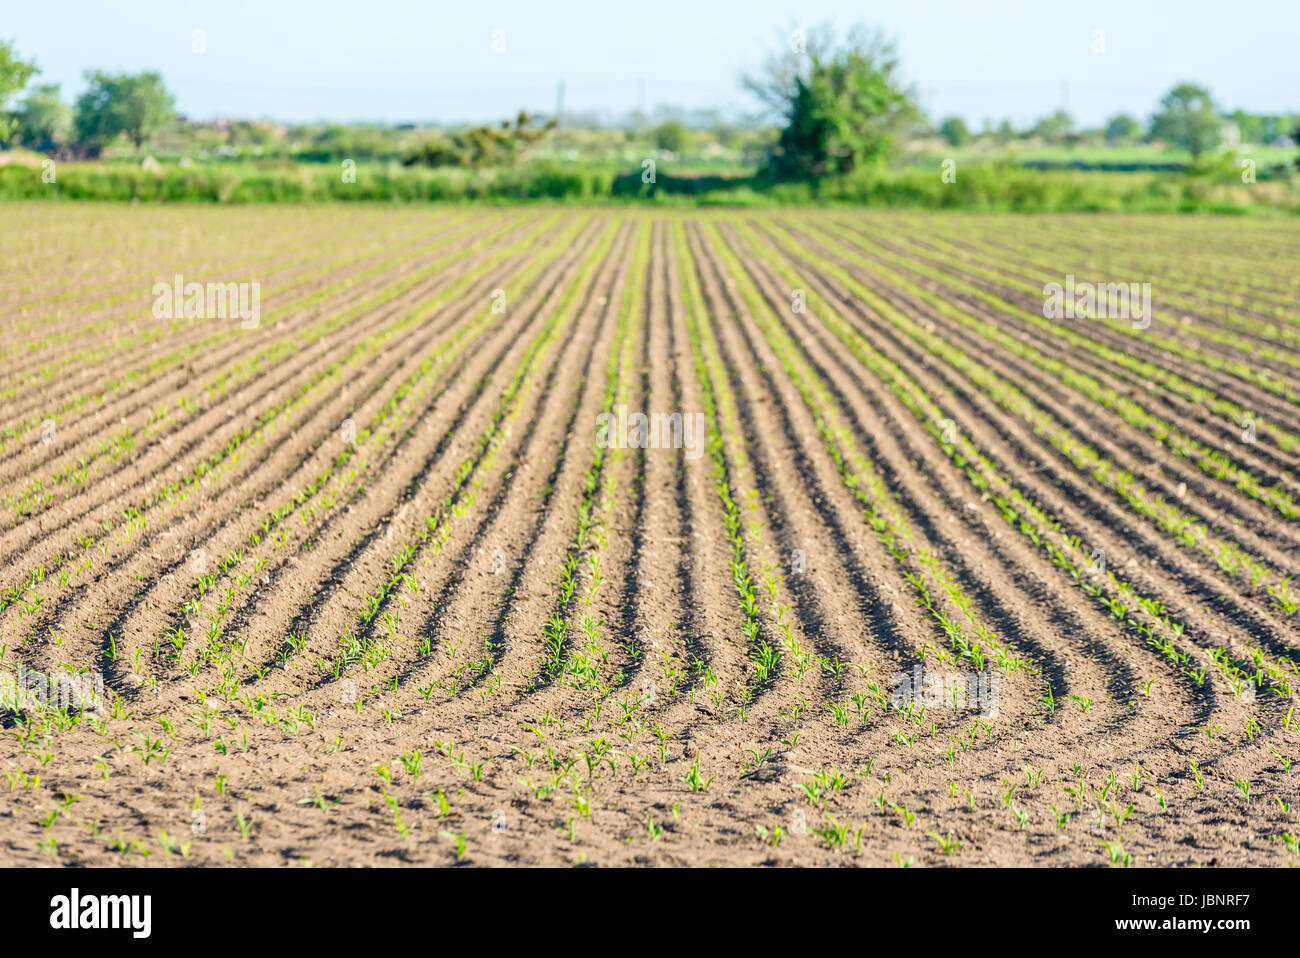 Lines and patterns in farmers field. Small plants beginning to grow. Shallow focus on foreground. Copy space. Stock Photo